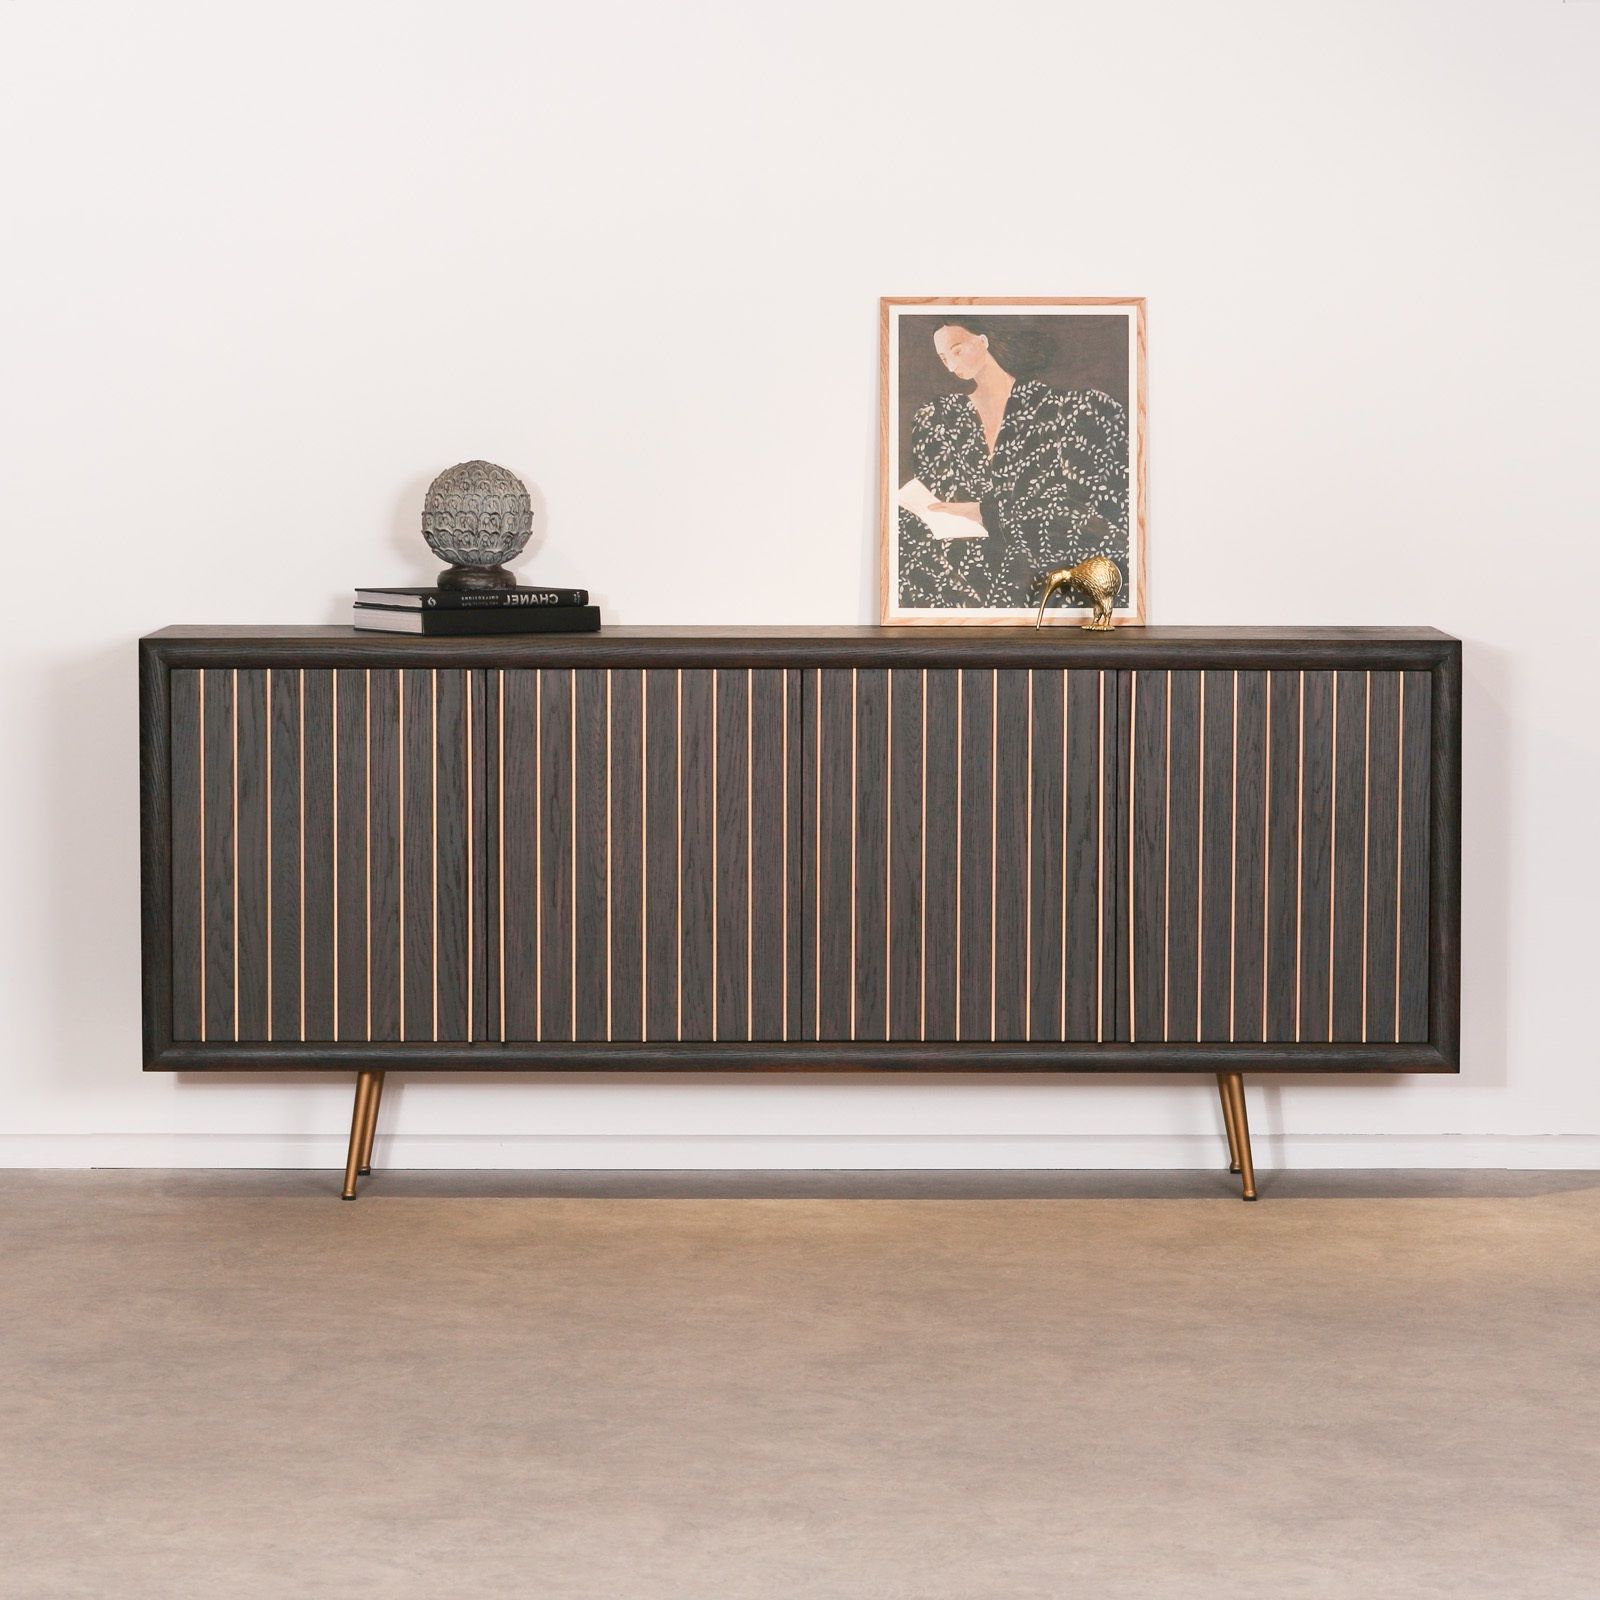 Widely Used Modern And Contemporary Sideboards Within Timea Slatted Contemporary Sideboard Is Inspired1940s Design (View 7 of 10)